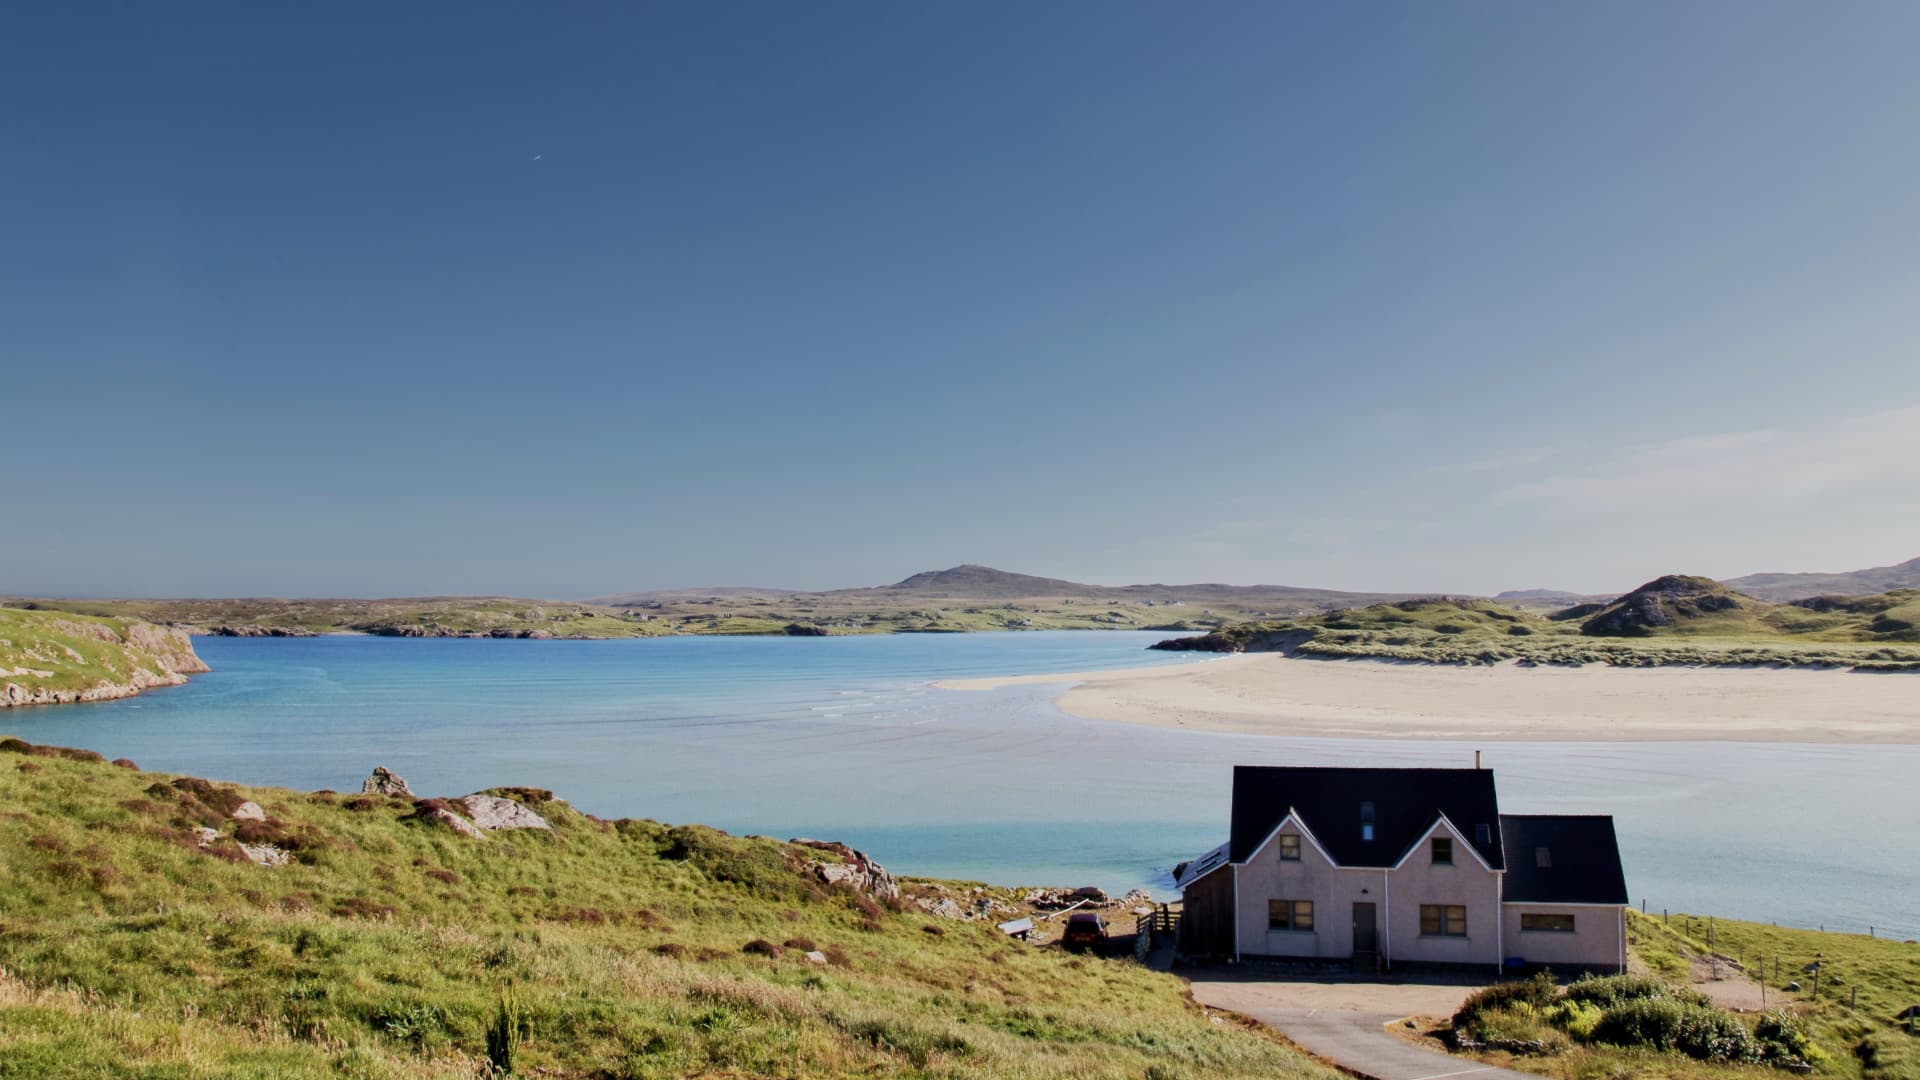 A lone cottage overlooking a sandy bay on the Isle of Lewis